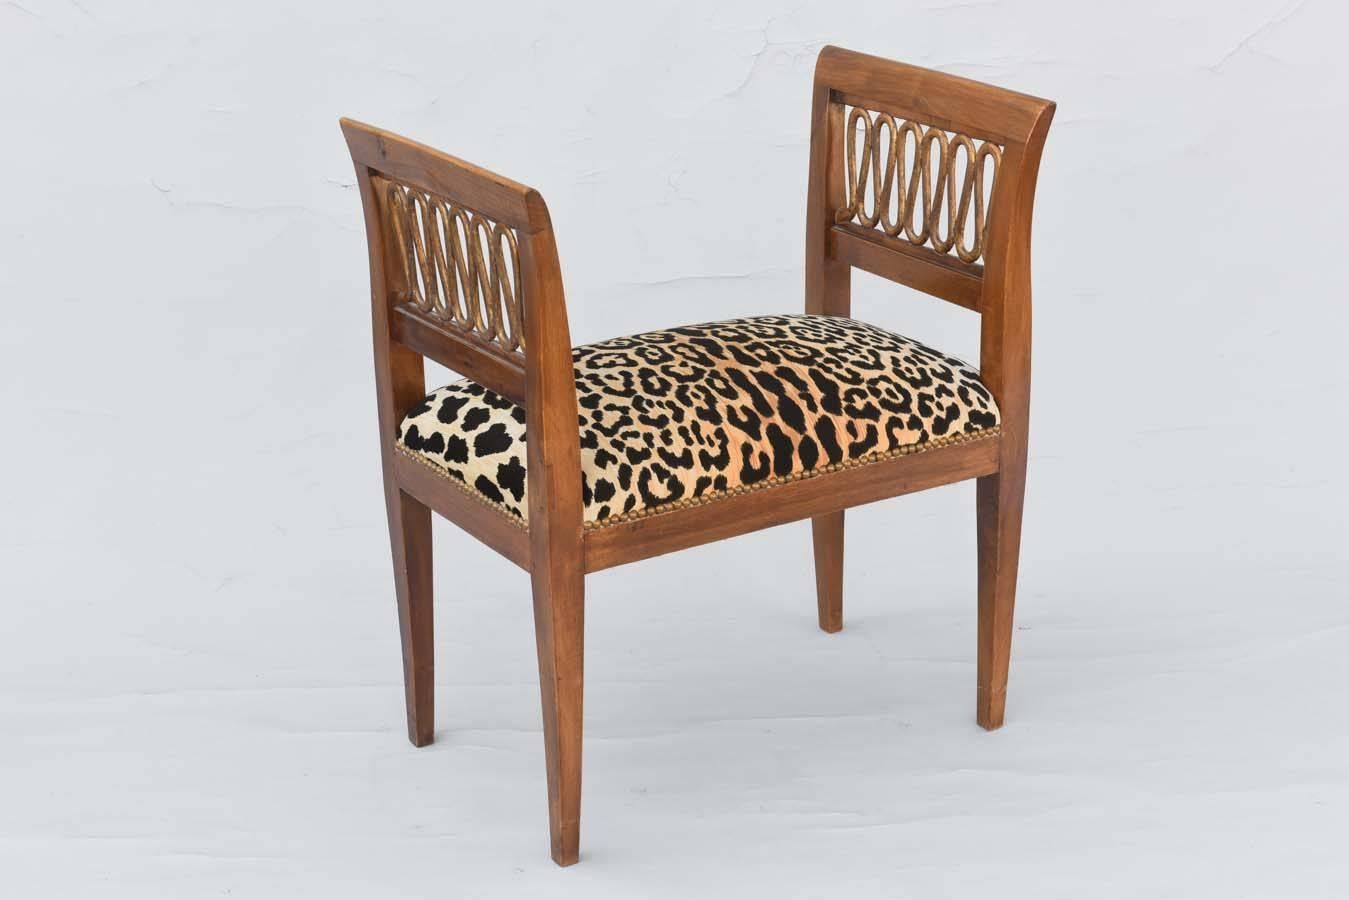 Bench, having a crown seat of leopard print fabric, with nailheads, flanked by square, flared arms, inset by pierced and gilded looping fretwork, raised on square-section, tapering legs. Upholstered in leopard print velvet, with nailheads. 

Stock